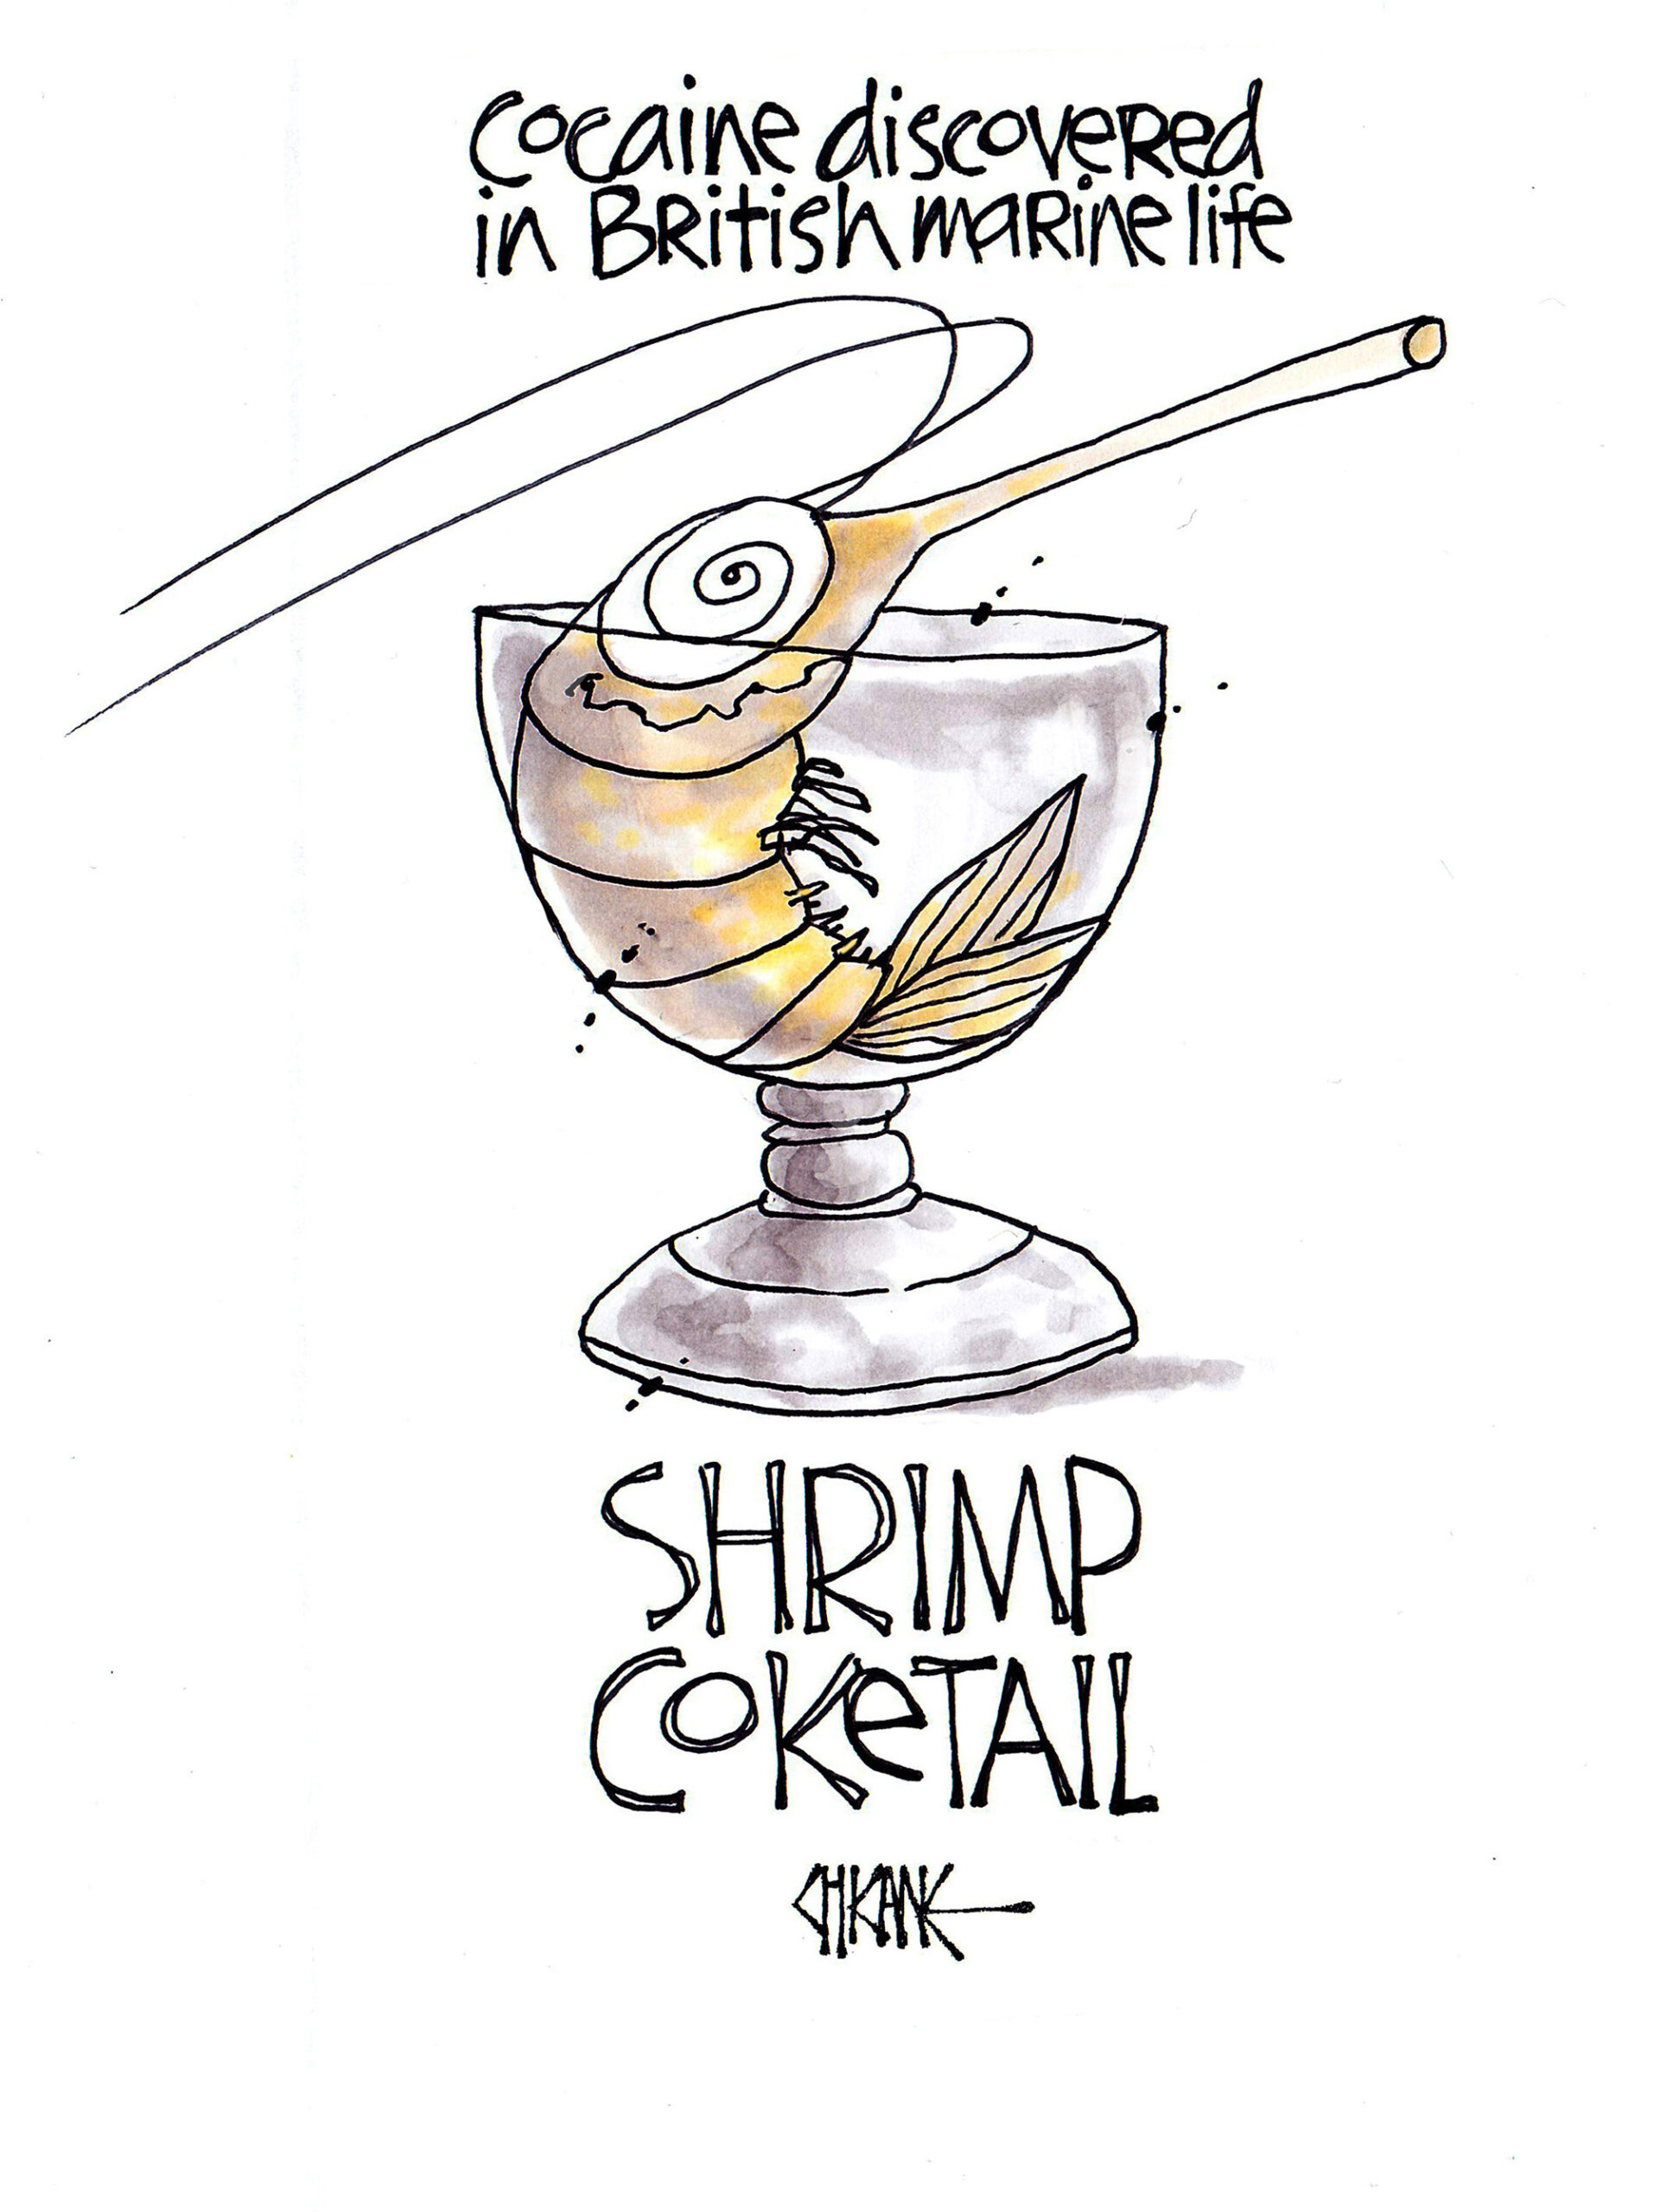 Cocaine discovered in British marine life. Shrimp Coketail drawing. Cartoon by Chicane.